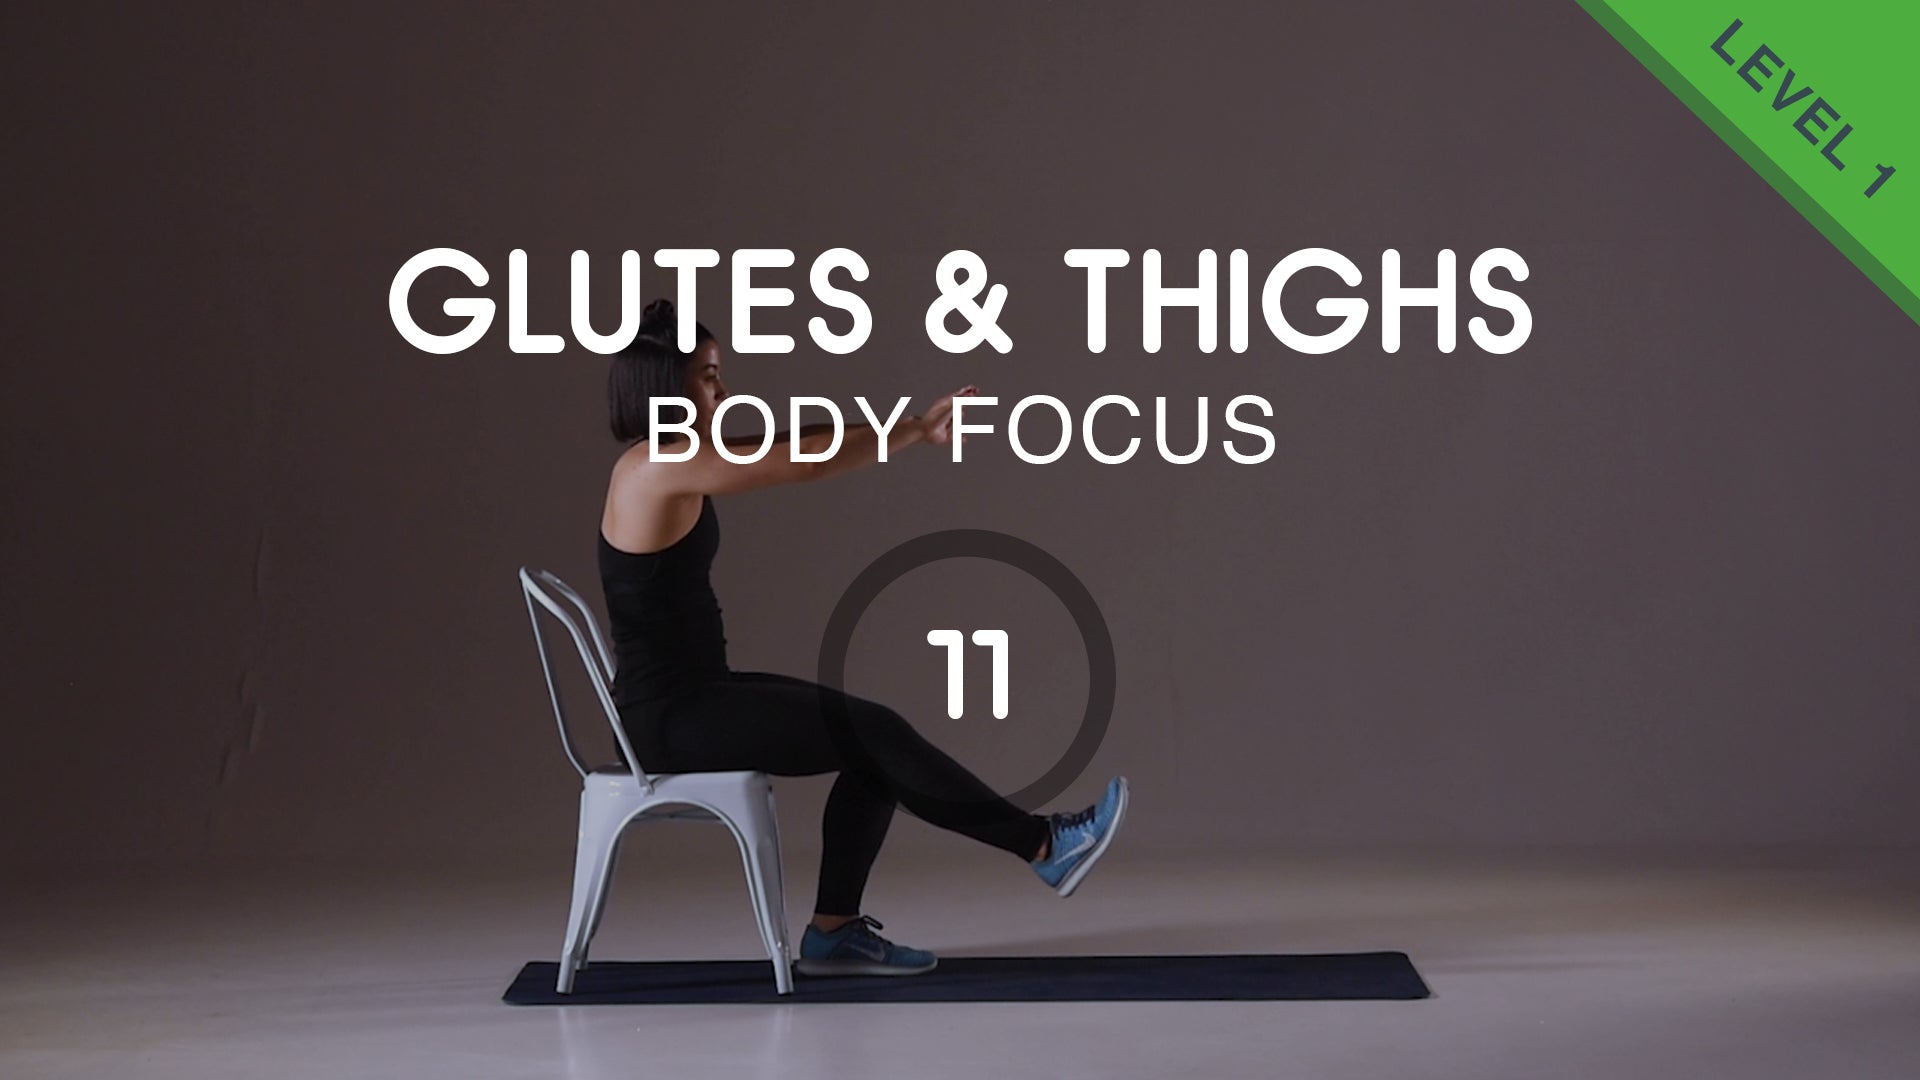 15 Amazing Inner Thigh Exercises to Tone and Define - Live Lean TV